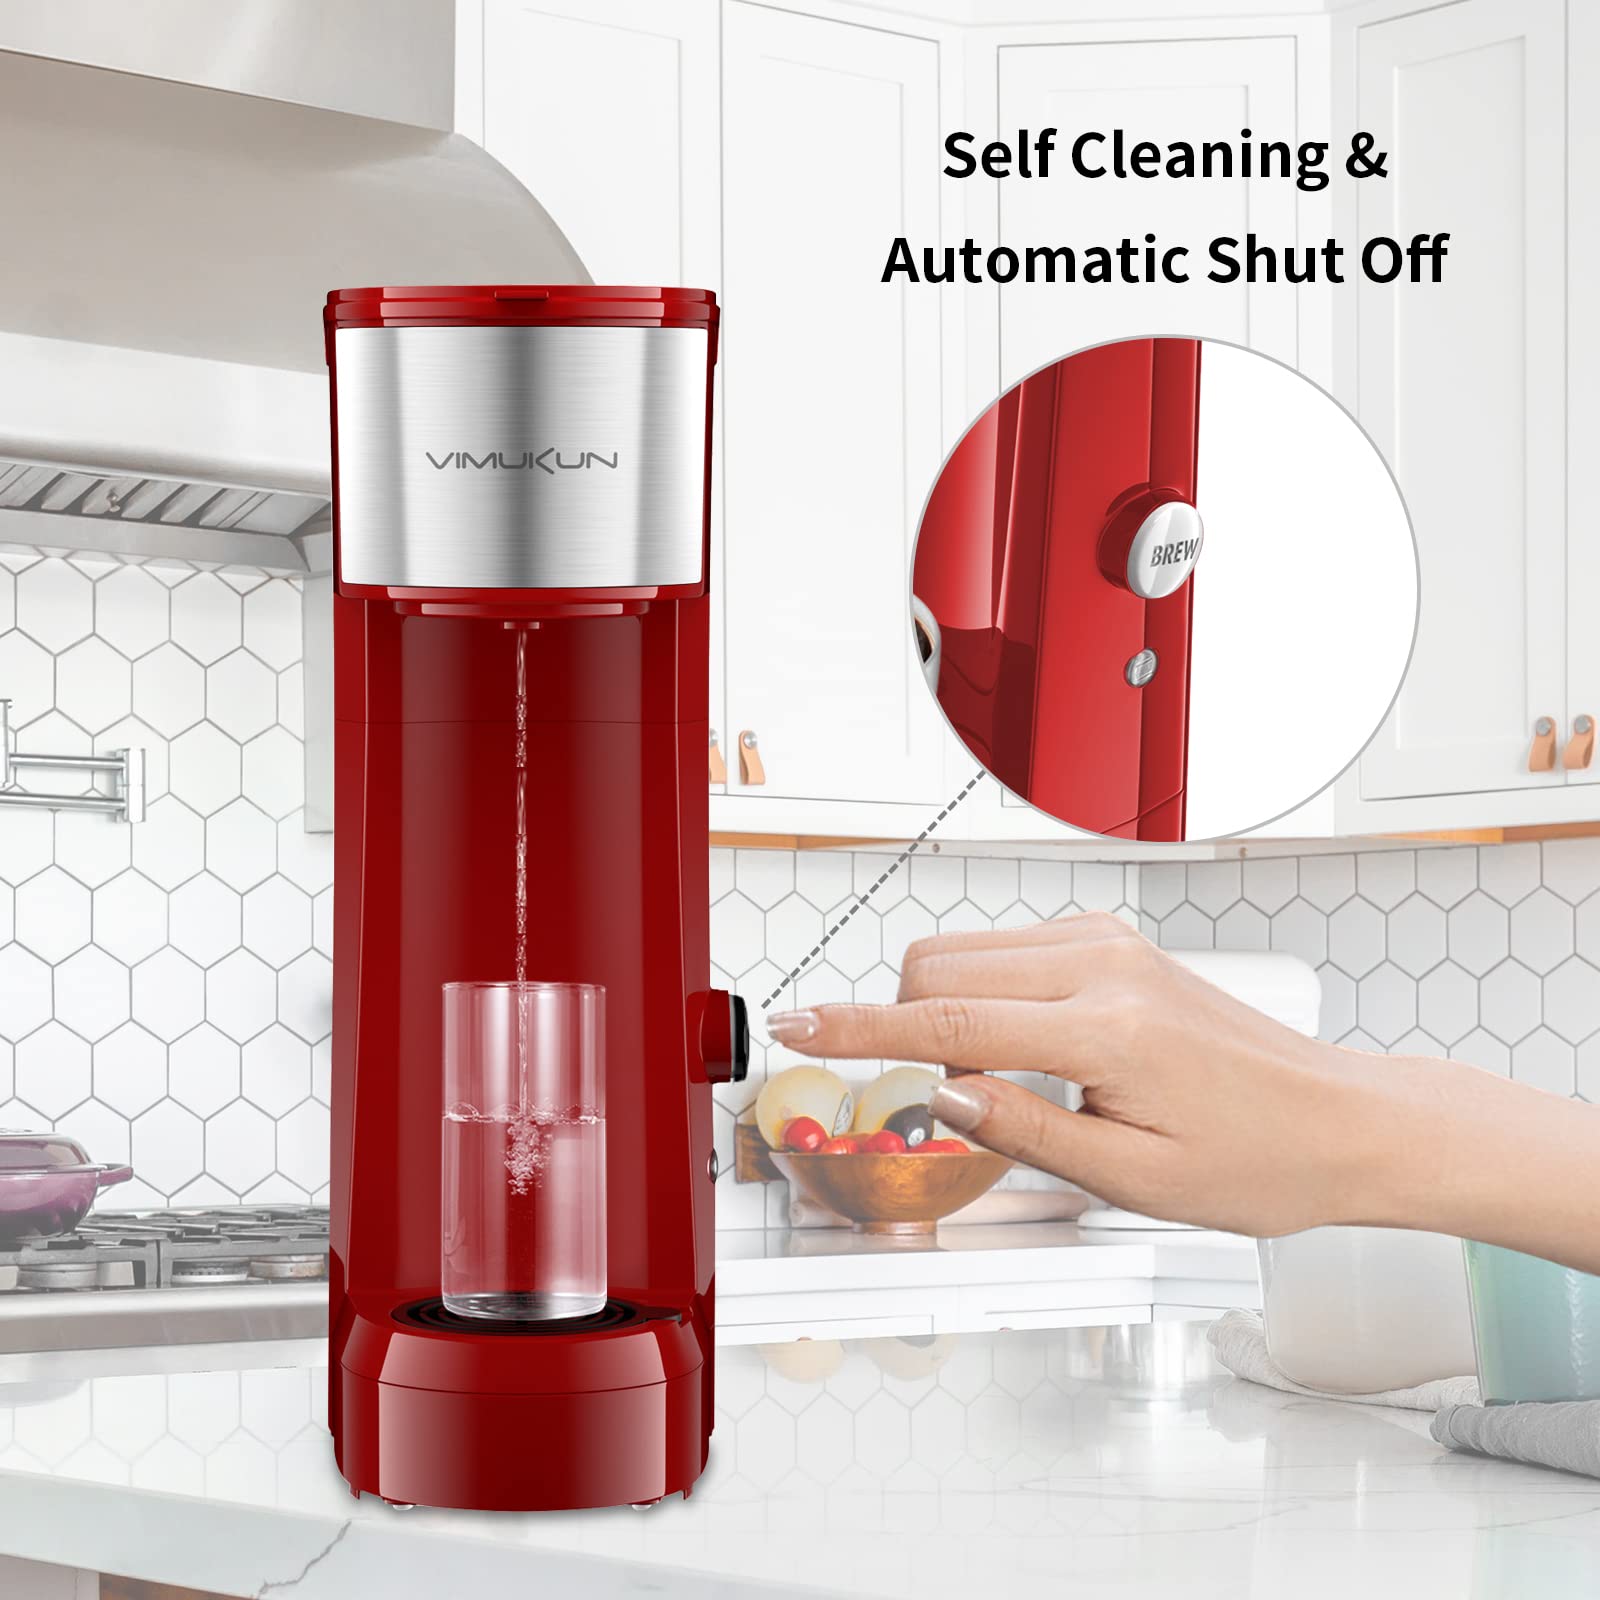 Superjoe Single Serve Coffee Maker for Pods and Ground Coffee, 6-14OZ  Reservoir One-Touch Control Button Coffee Machine, Red 